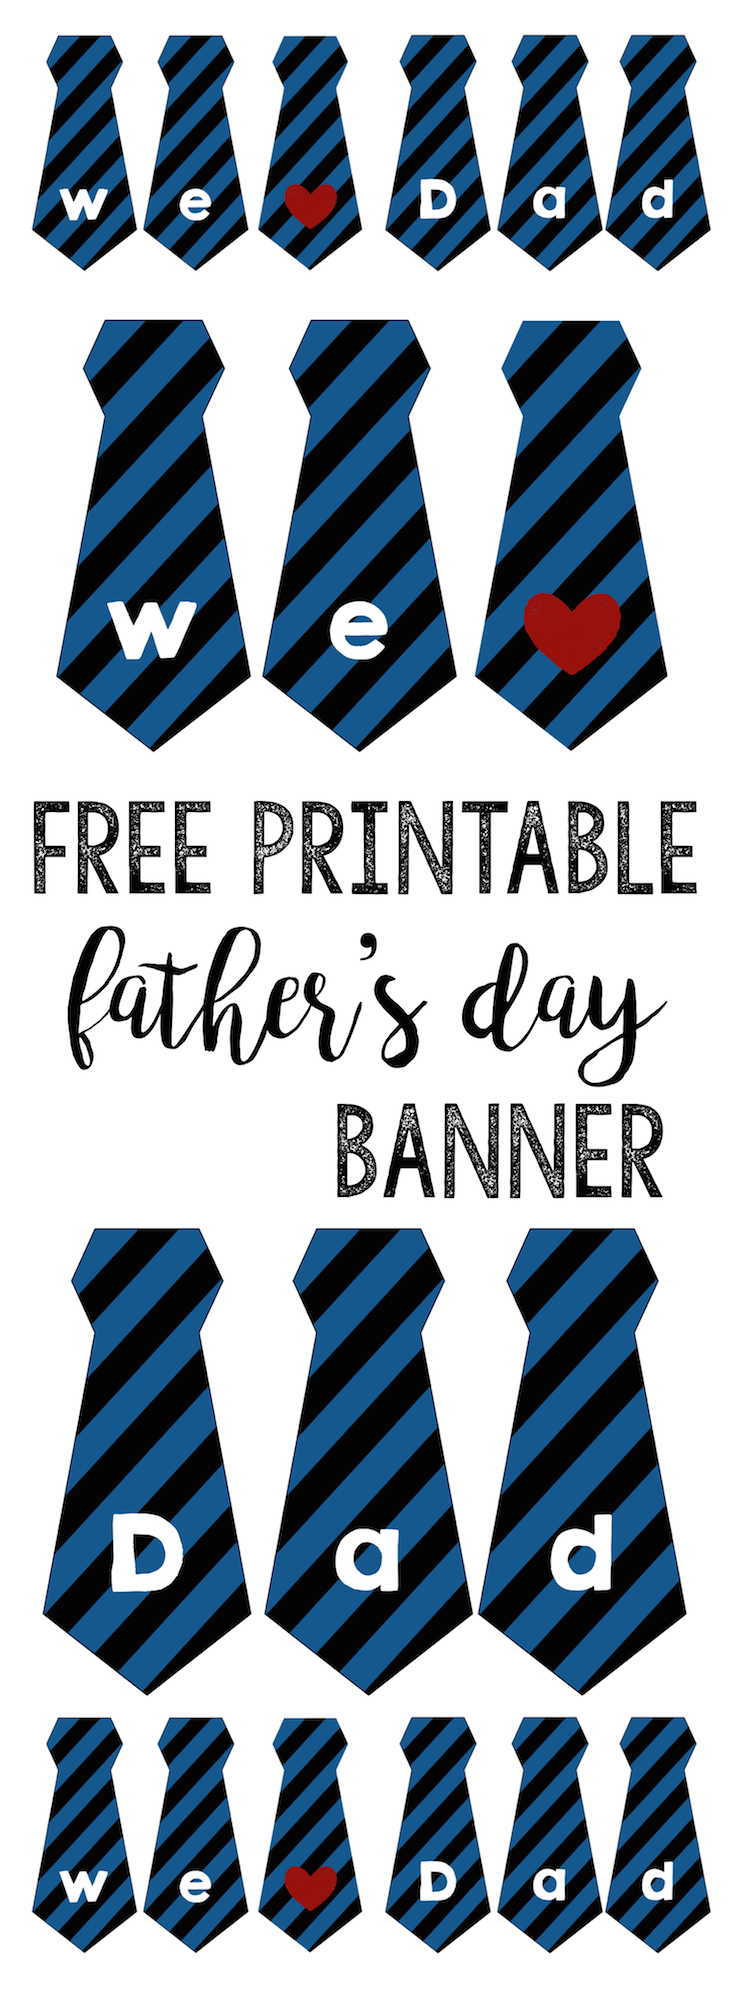 Father's day banner free printable. Print this father's day neck tie banner and display for Dad on fathers day.